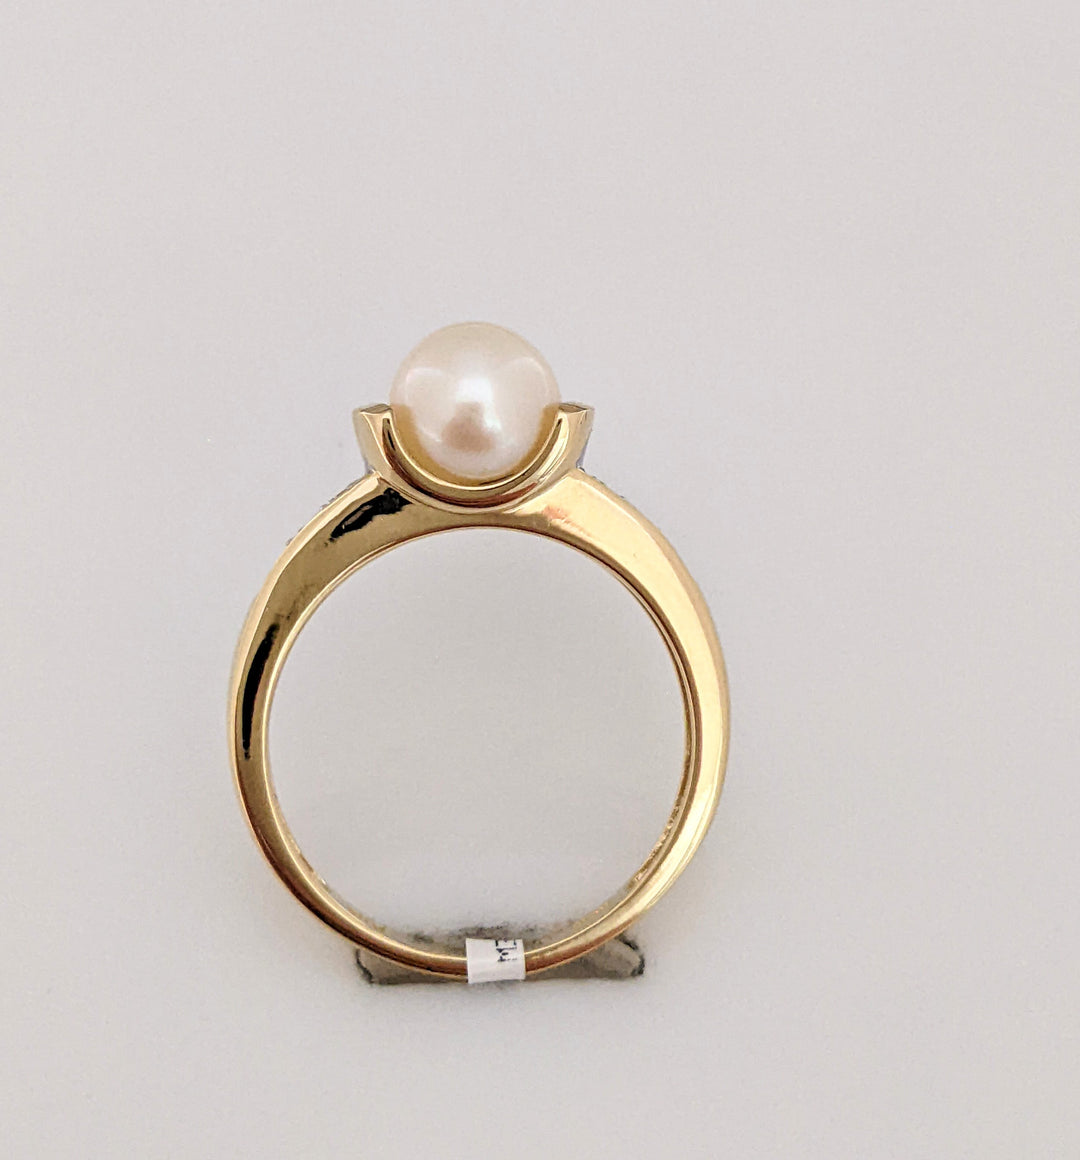 10K PEARL ROUND 7MM WITH/6 DIAMONDS ESTATE RING 3.0 GRAMS